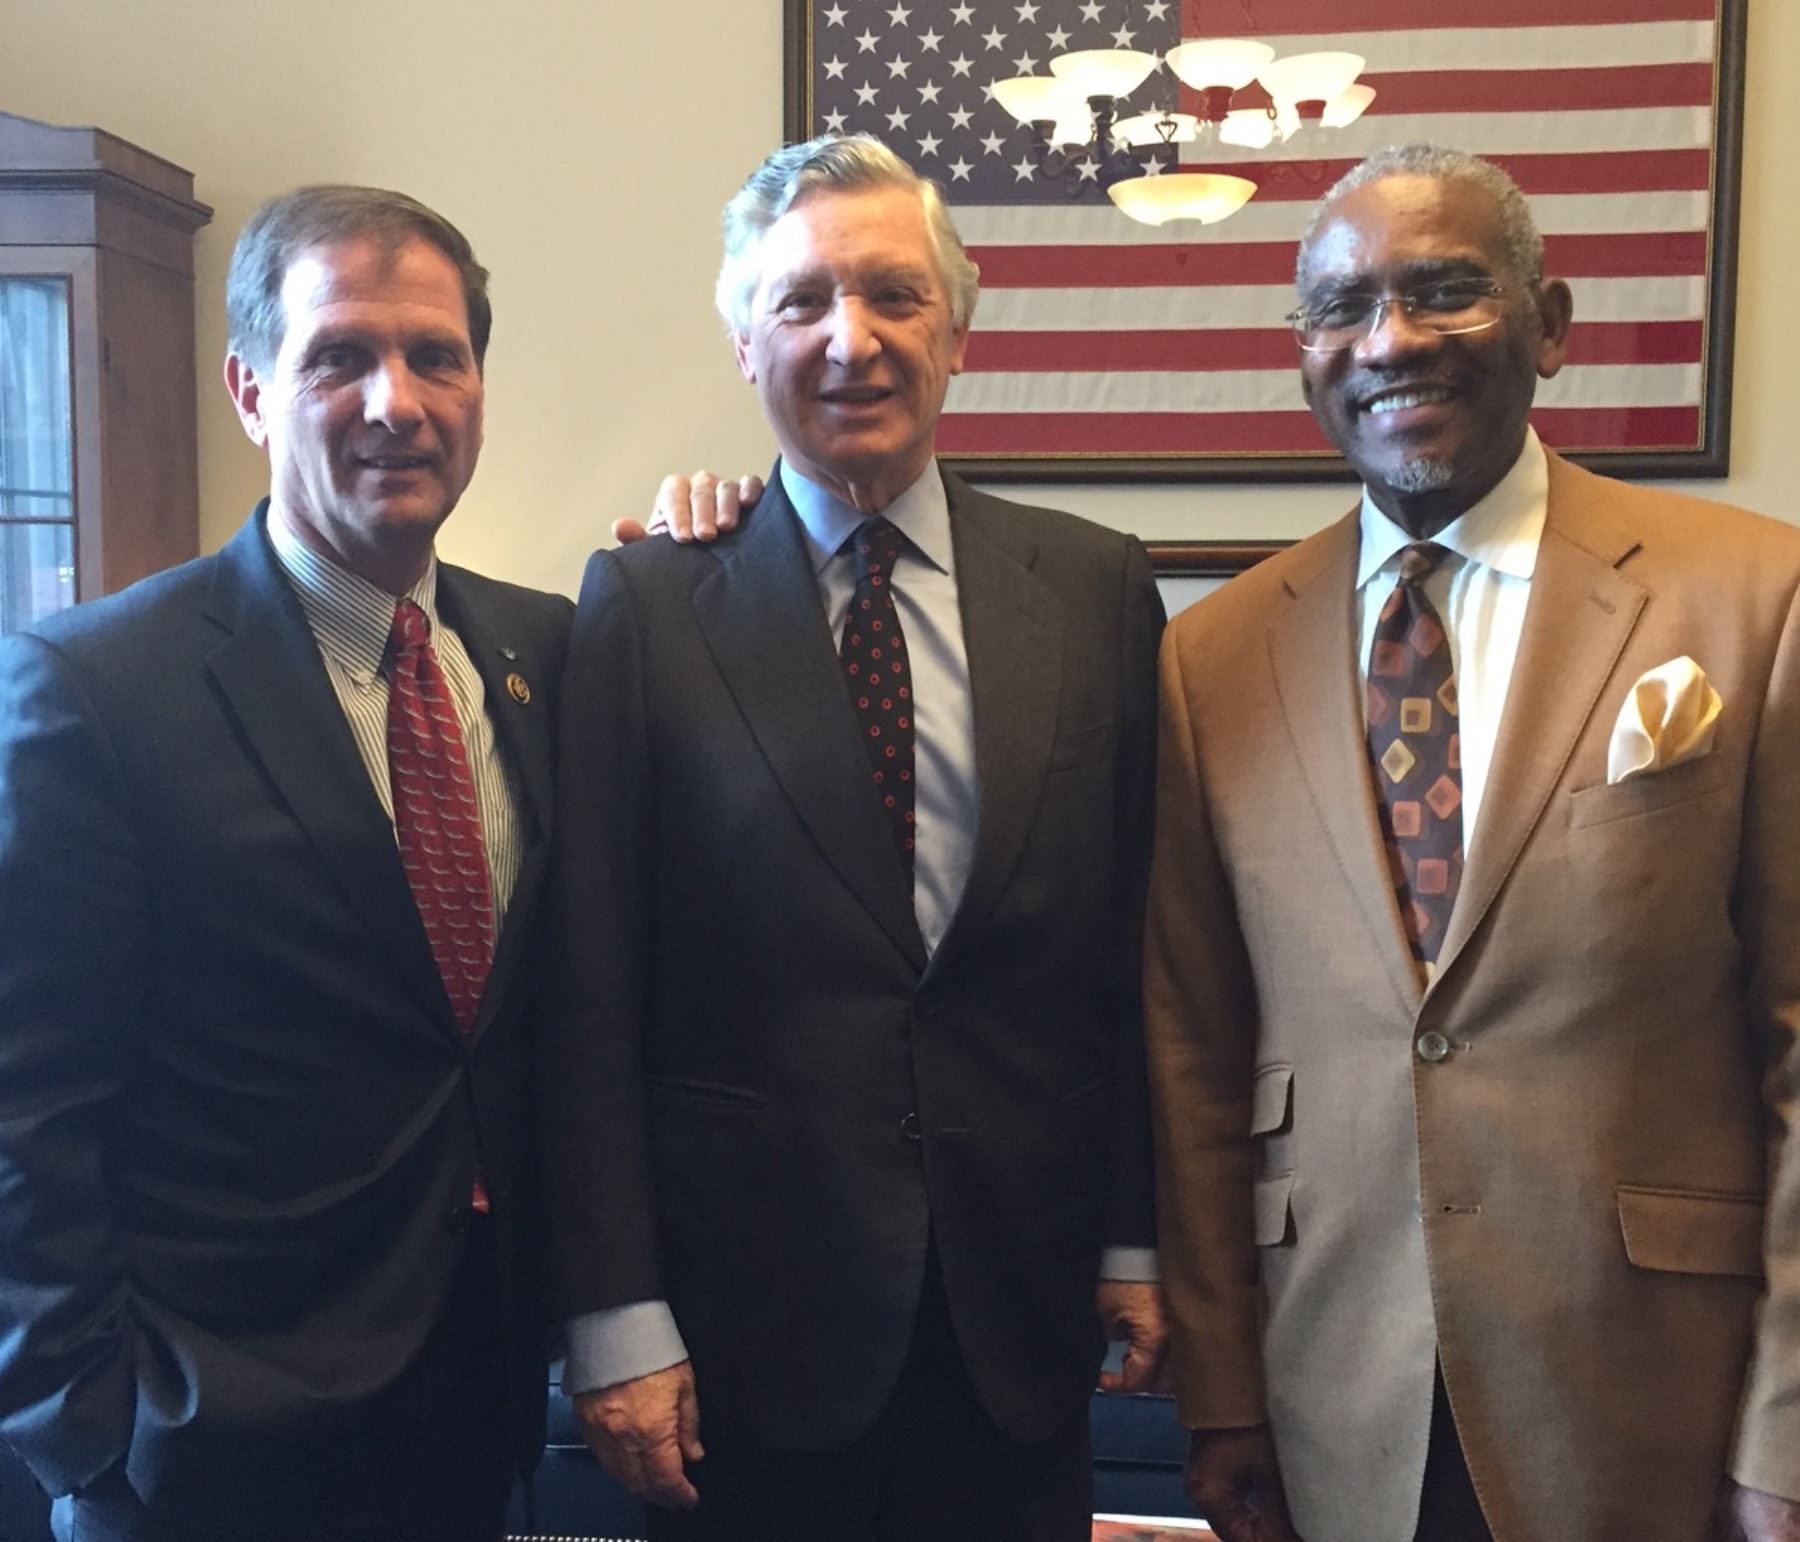 Congressional Caucus on Peru Co-Chairs, Senator Christopher Stewart (R-Utah), Representative Gregory Meeks (D-NY), and Peruvian Ambassador to the United States Carlos Pareja discuss bilateral issues.